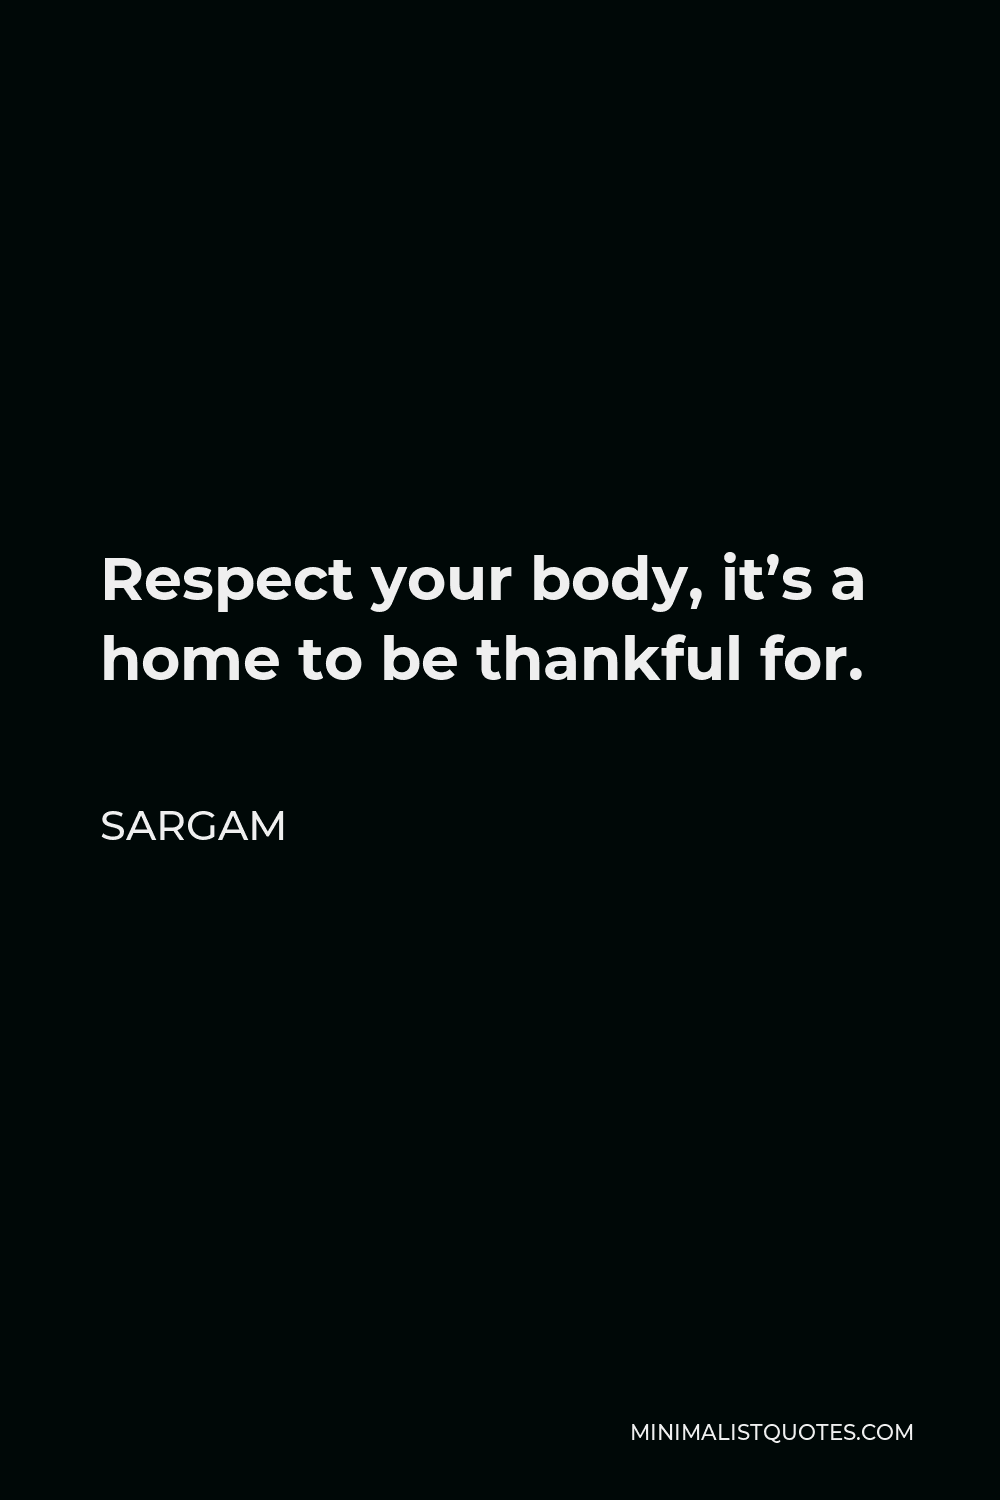 Sargam Quote - Respect your body, it’s a home to be thankful for.